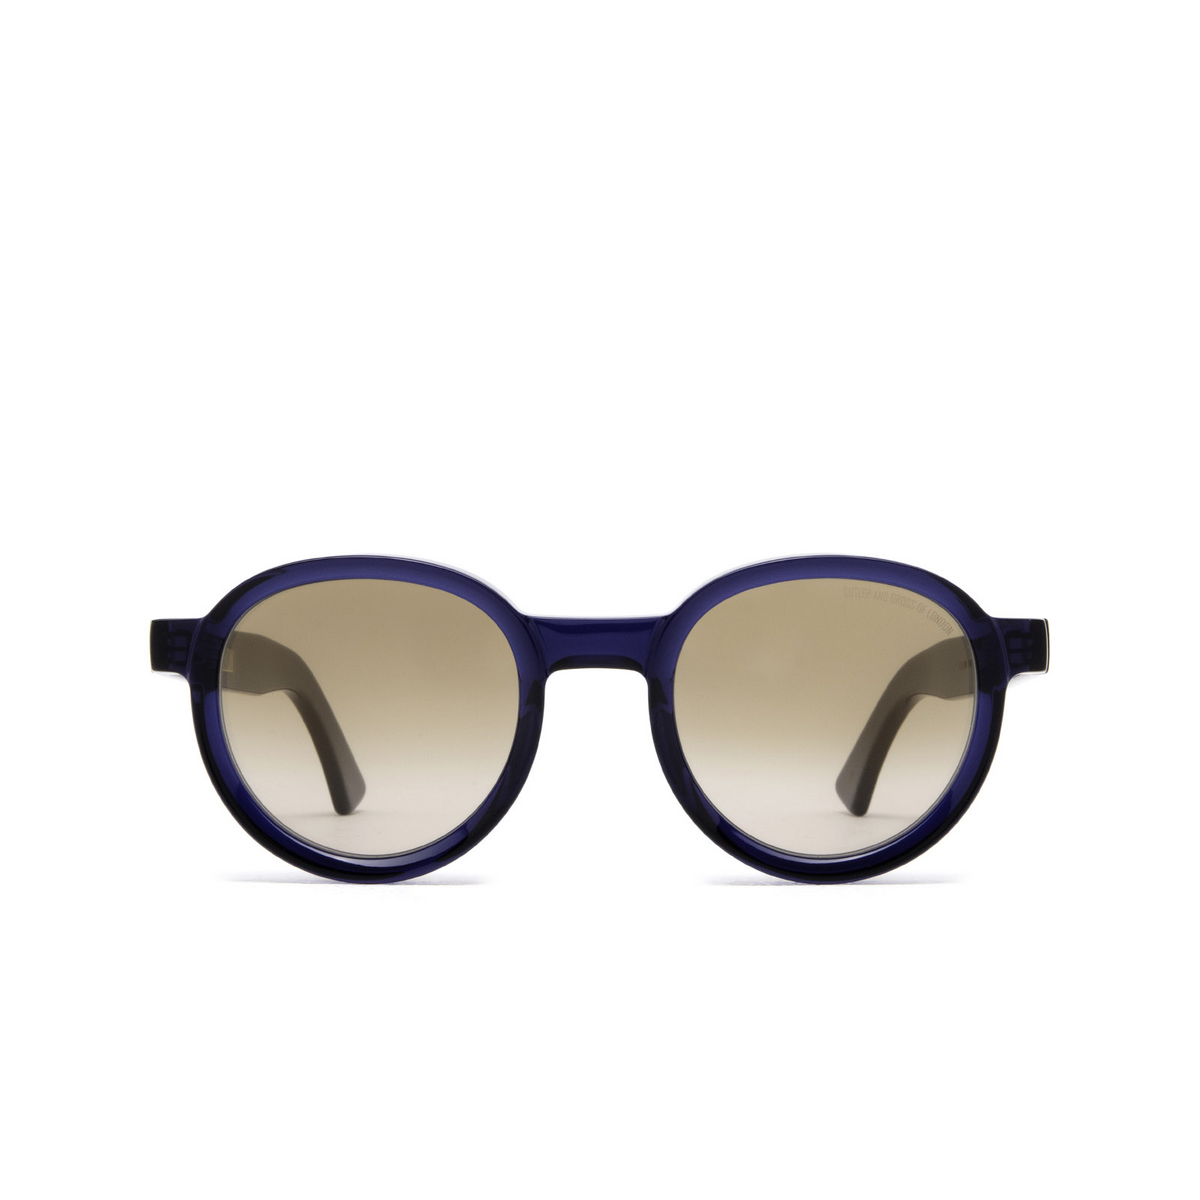 Cutler and Gross 1384 Sunglasses 02 Classic Navy Blue - front view